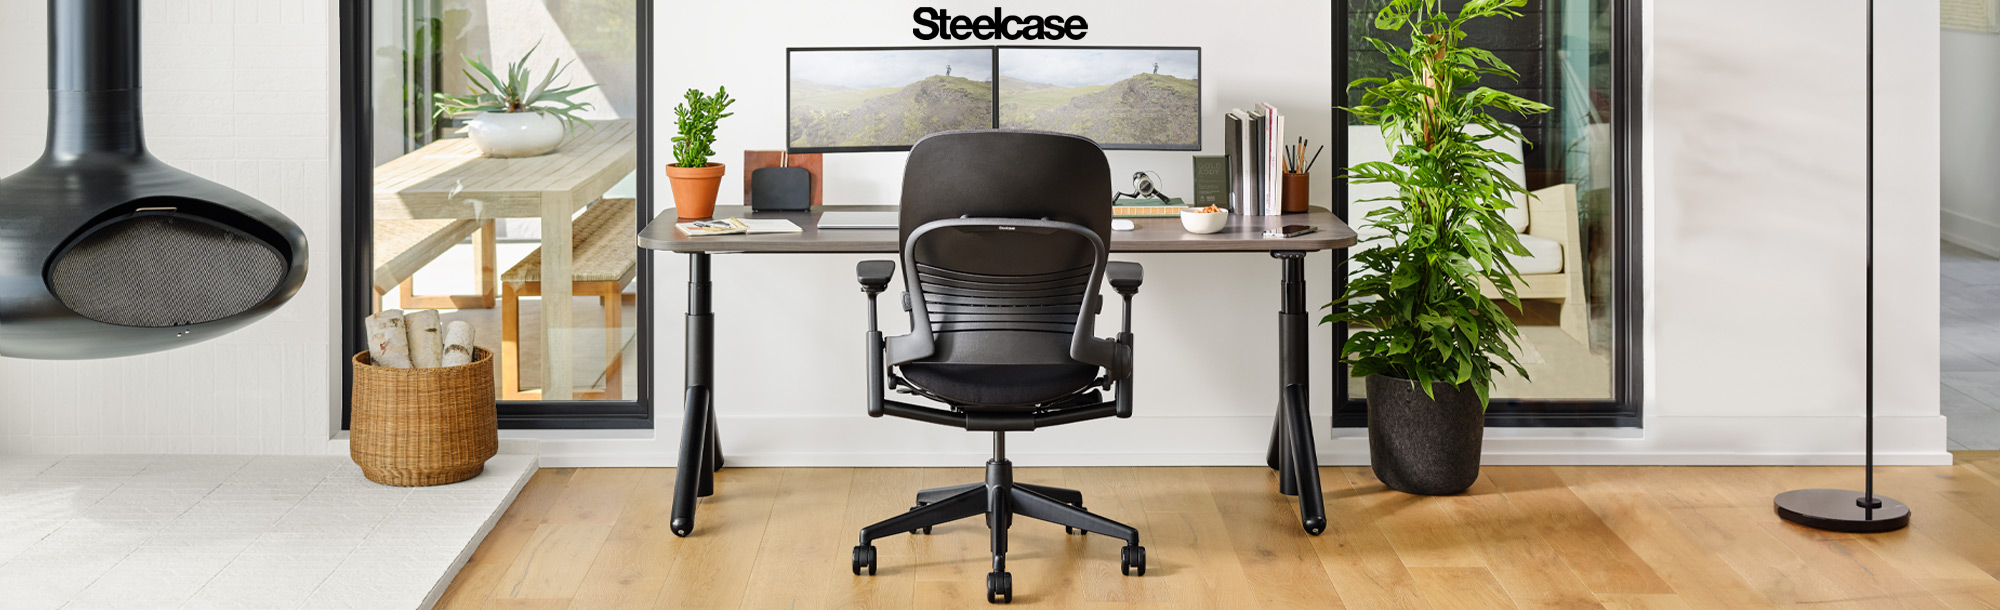 Home office, Steelcase